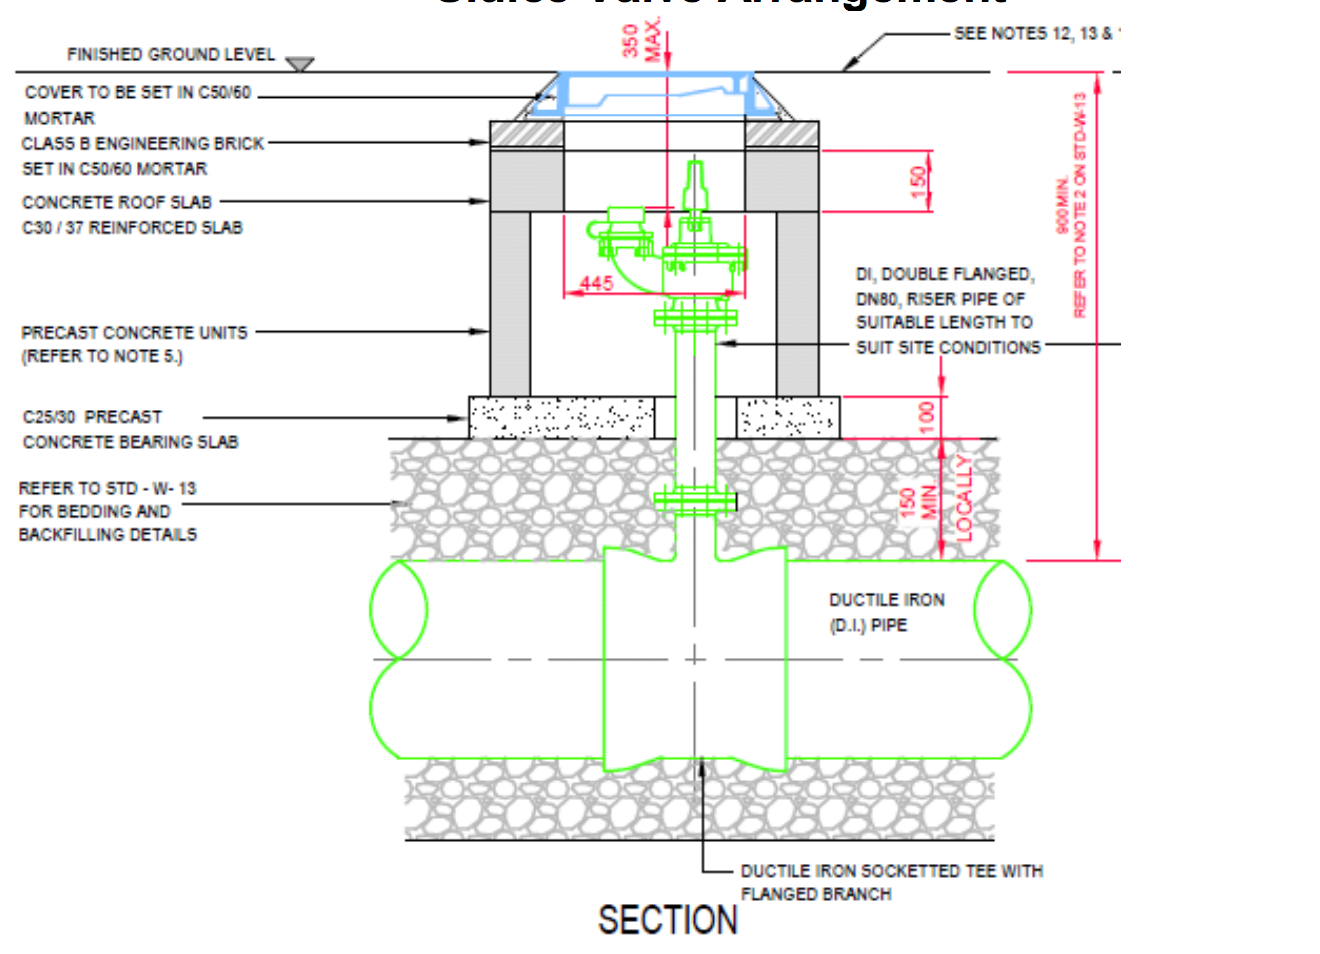 Diagram HIW5 - Typical hydrant arrangement - Extract from Irish Water